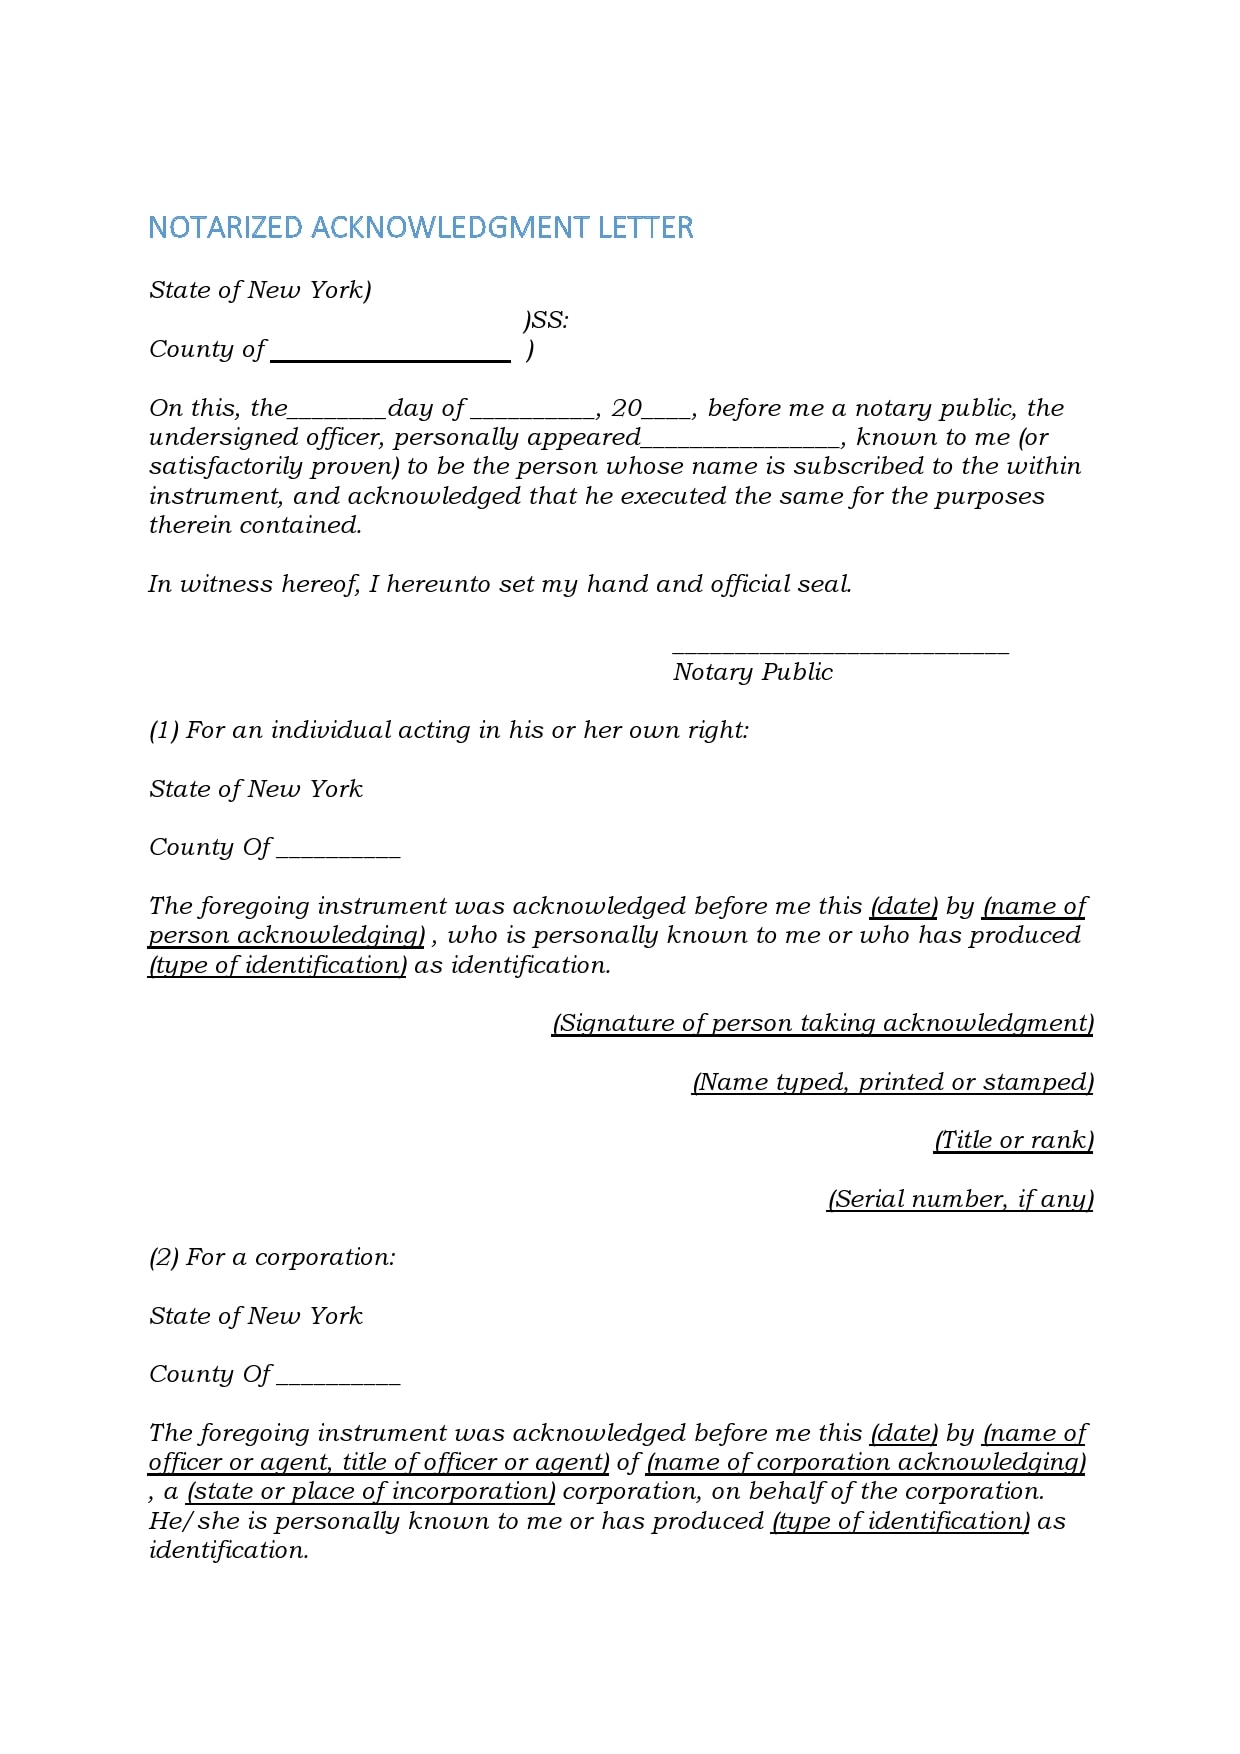 Notarized Letter Template Word from templatearchive.com